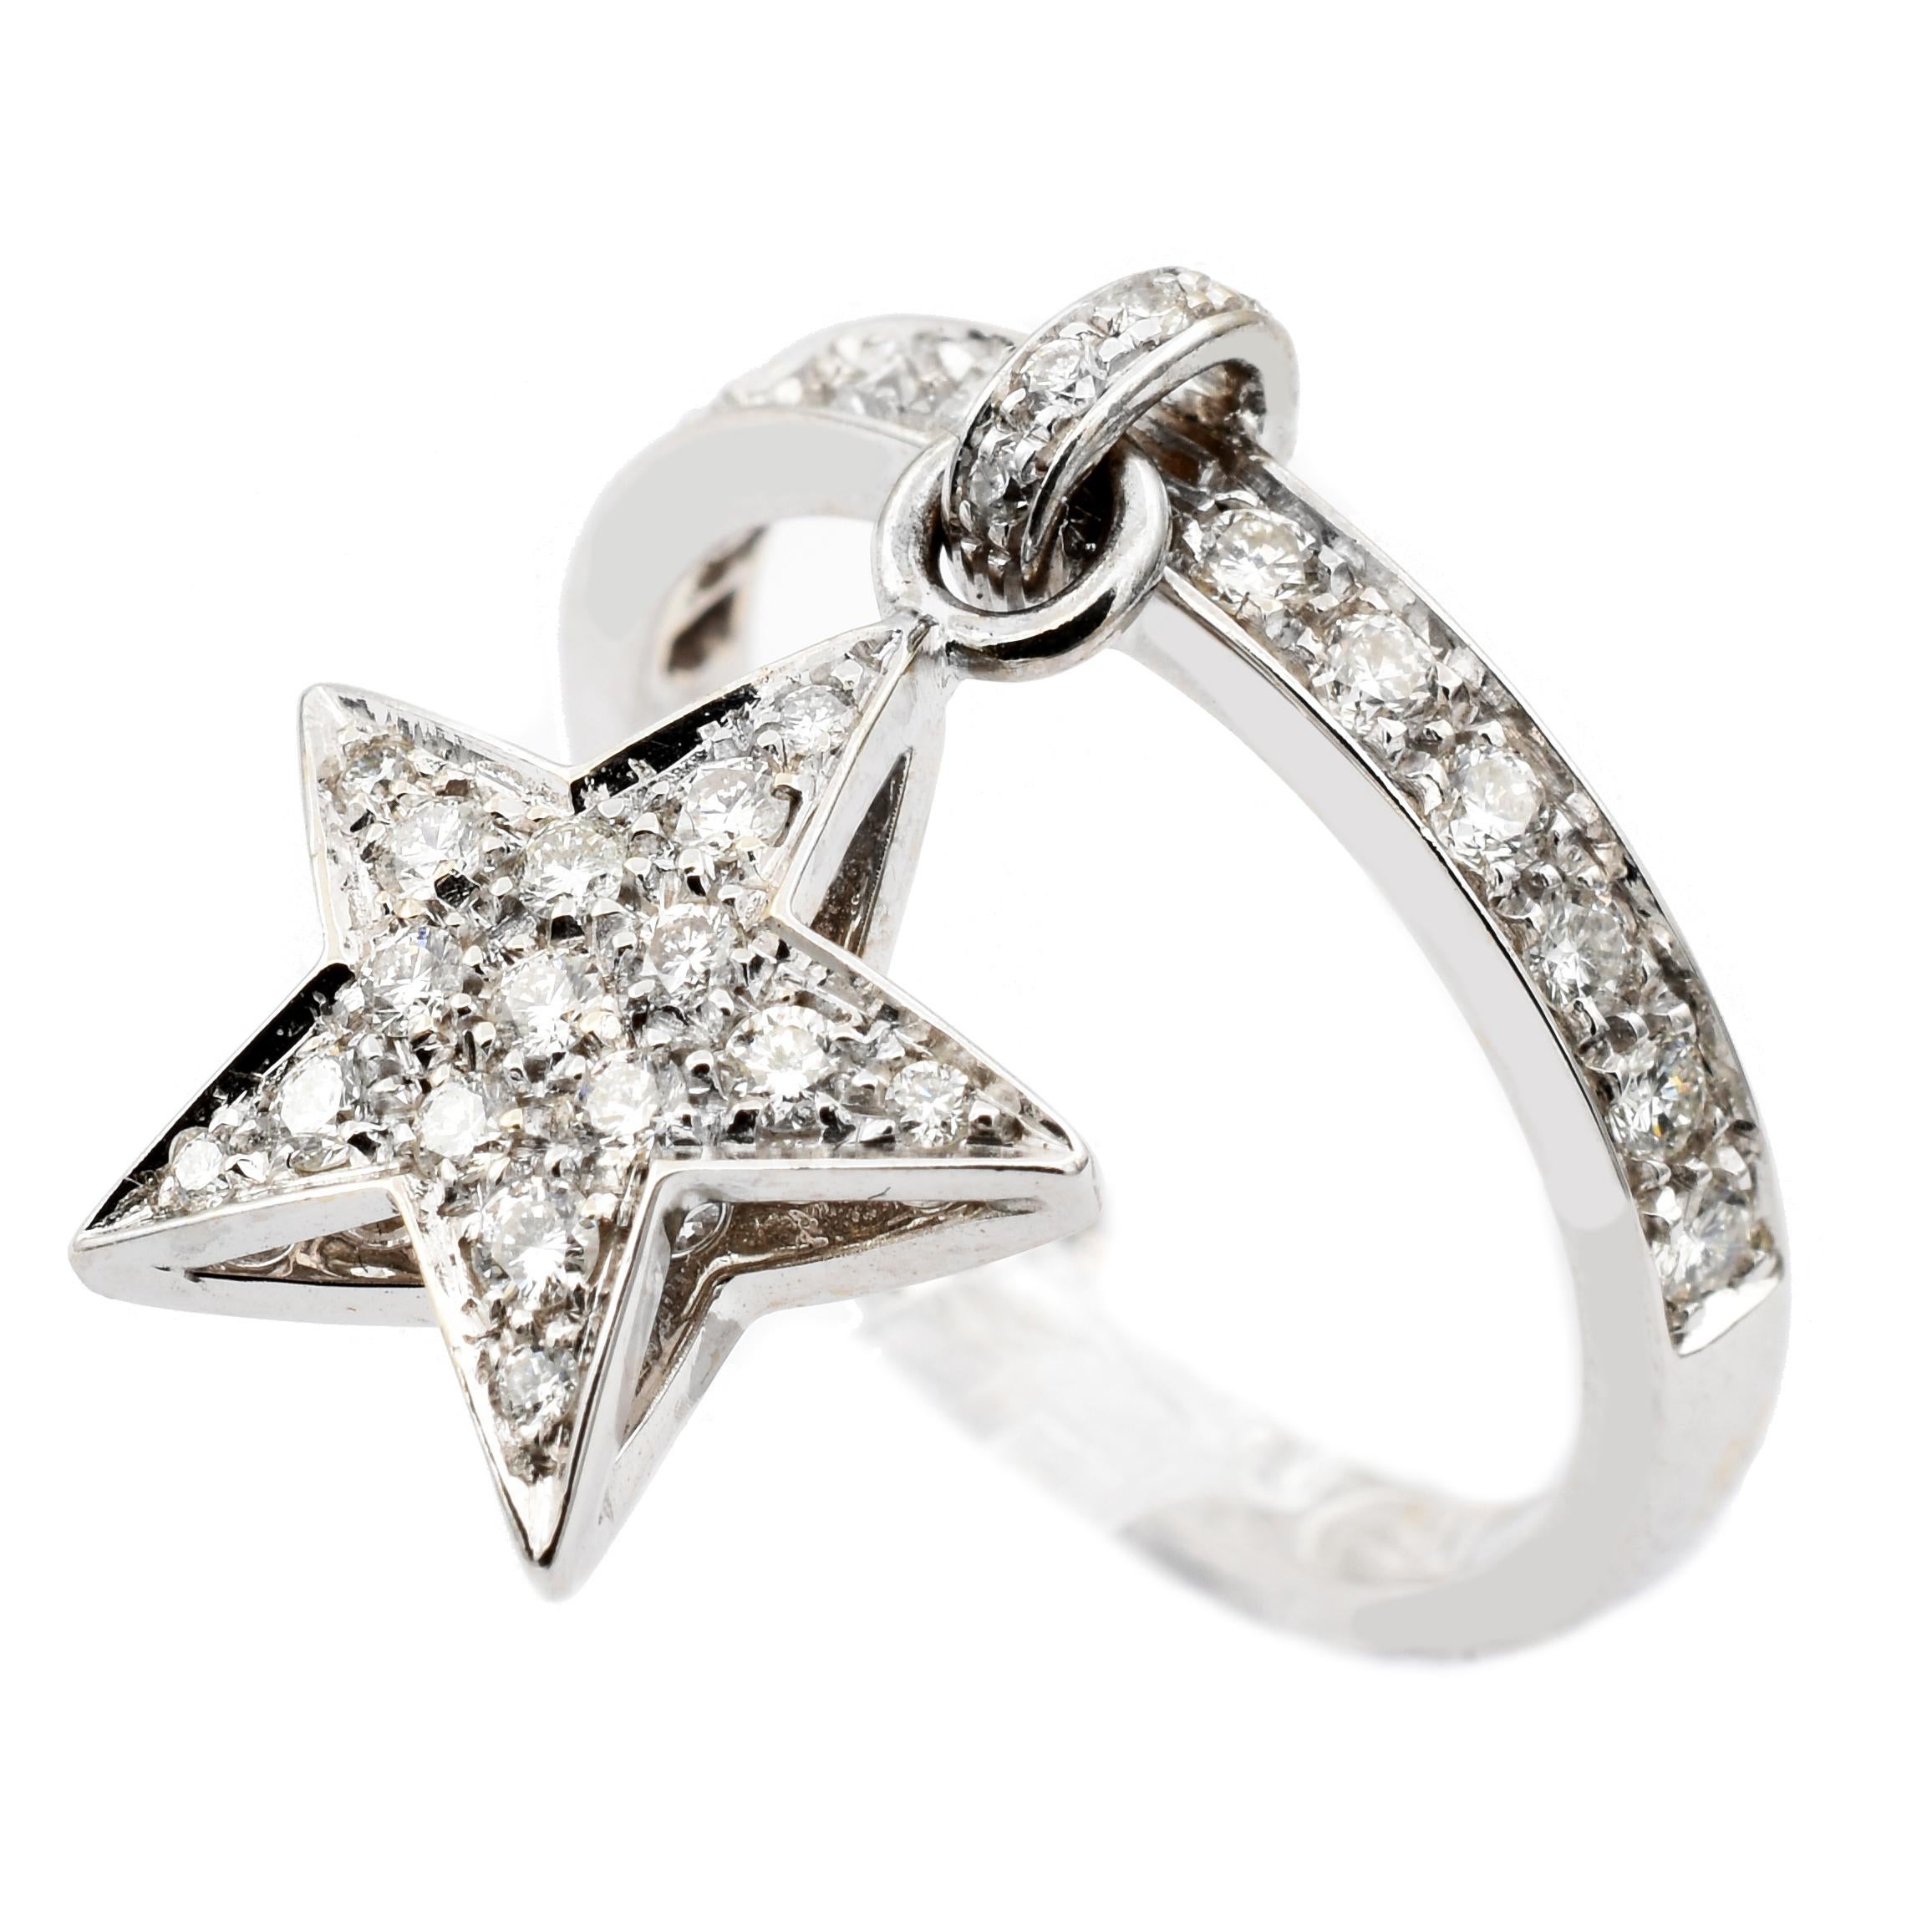 18 Kt White Gold Ring with Pendant Star Charm. This Charm is set in both sides with White Diamonds and hangs freely on the ring.
A very Funny and Happy Ring that perfectly match with a wedding ring for an everyday use.
Handmade in Italy in or